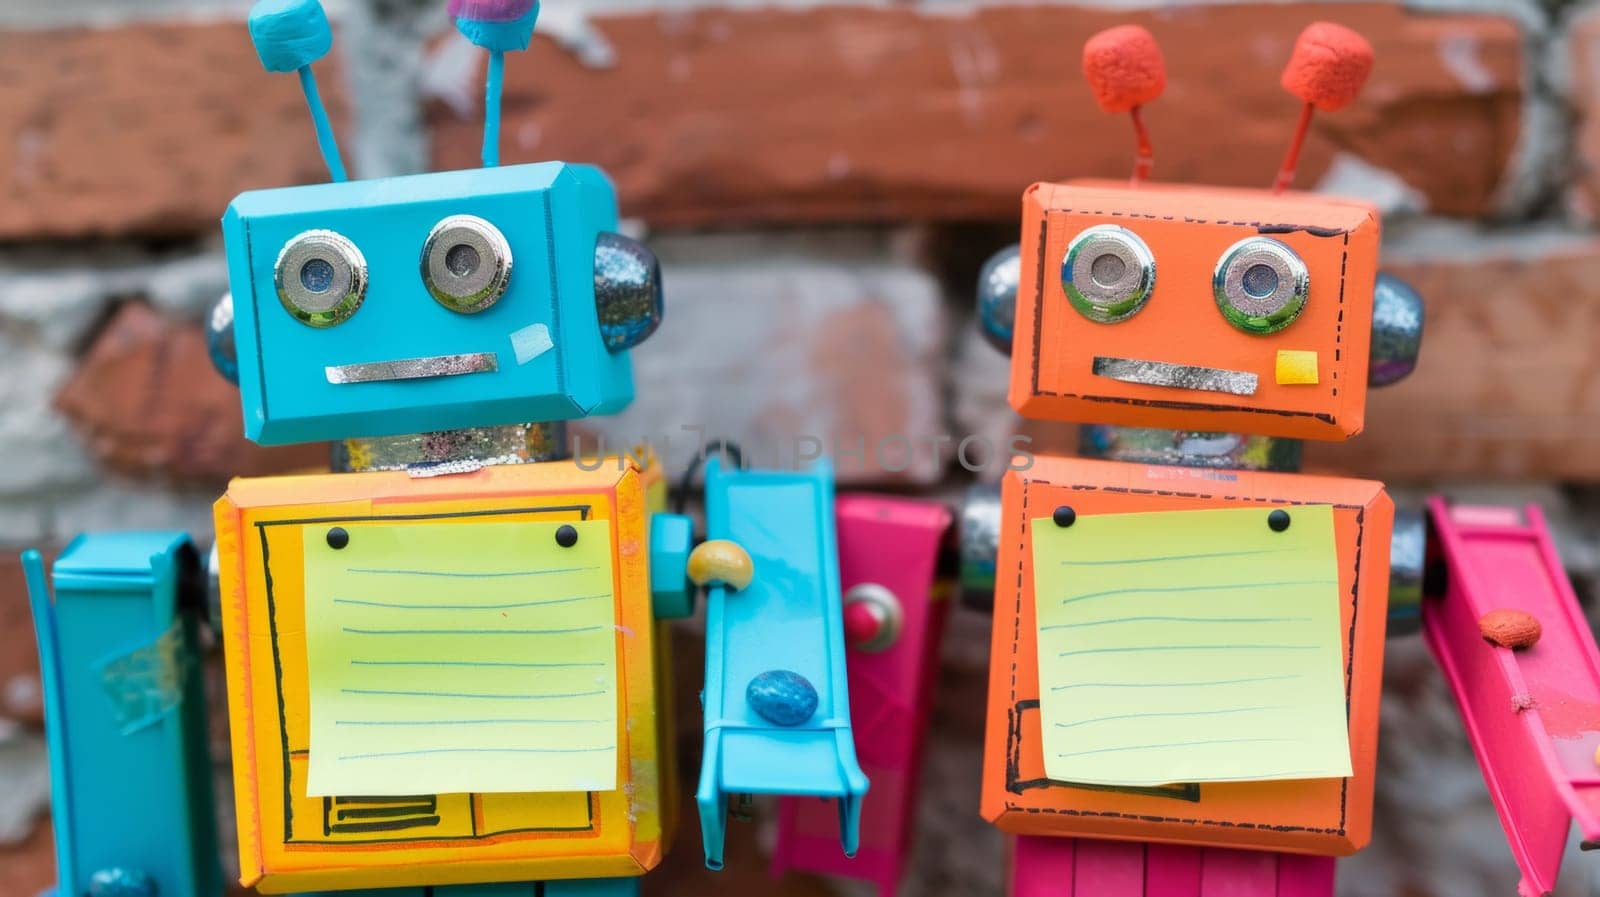 Two colorful robots with note pads attached to their backs